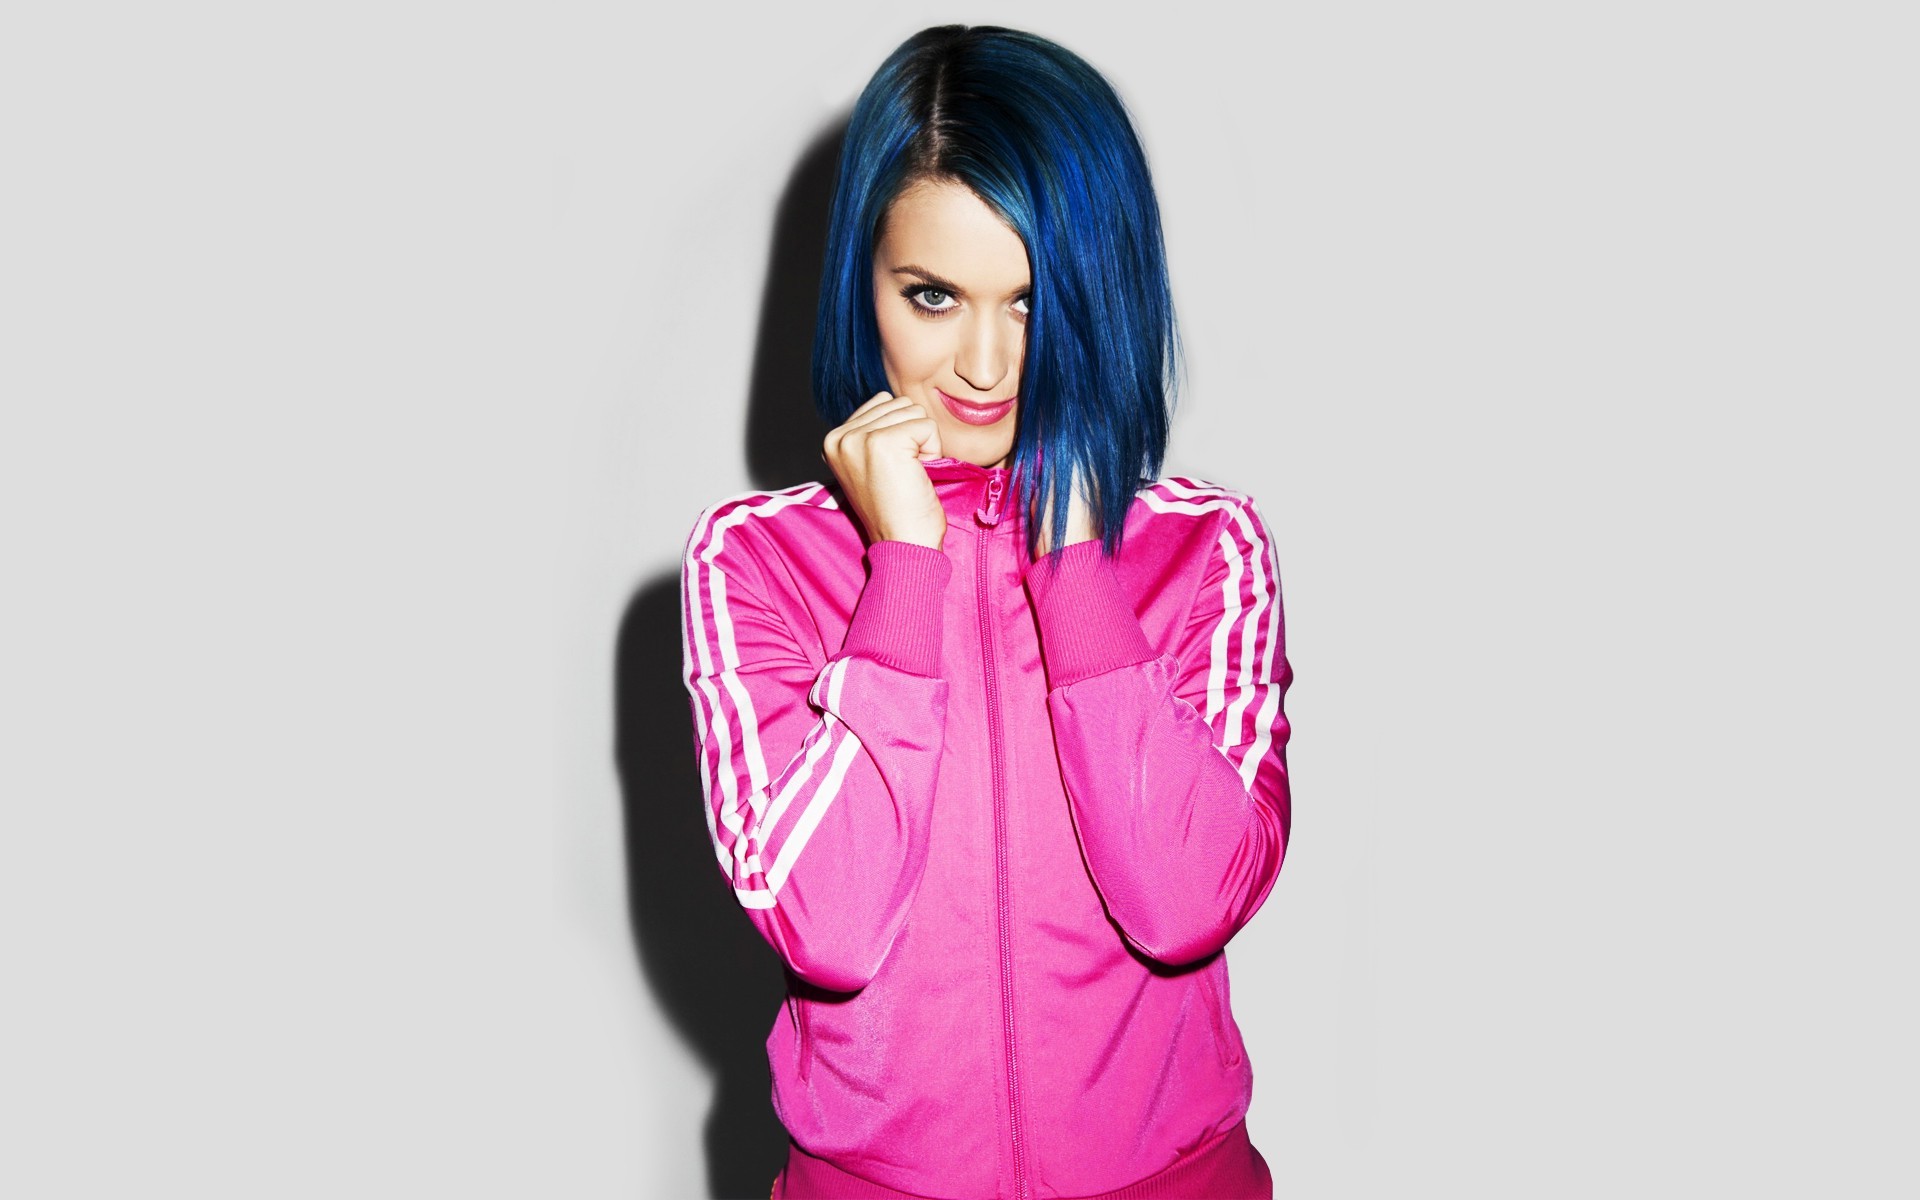 Katy Perry in a pink tracksuit.